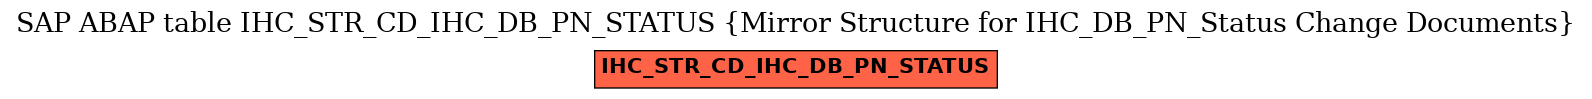 E-R Diagram for table IHC_STR_CD_IHC_DB_PN_STATUS (Mirror Structure for IHC_DB_PN_Status Change Documents)